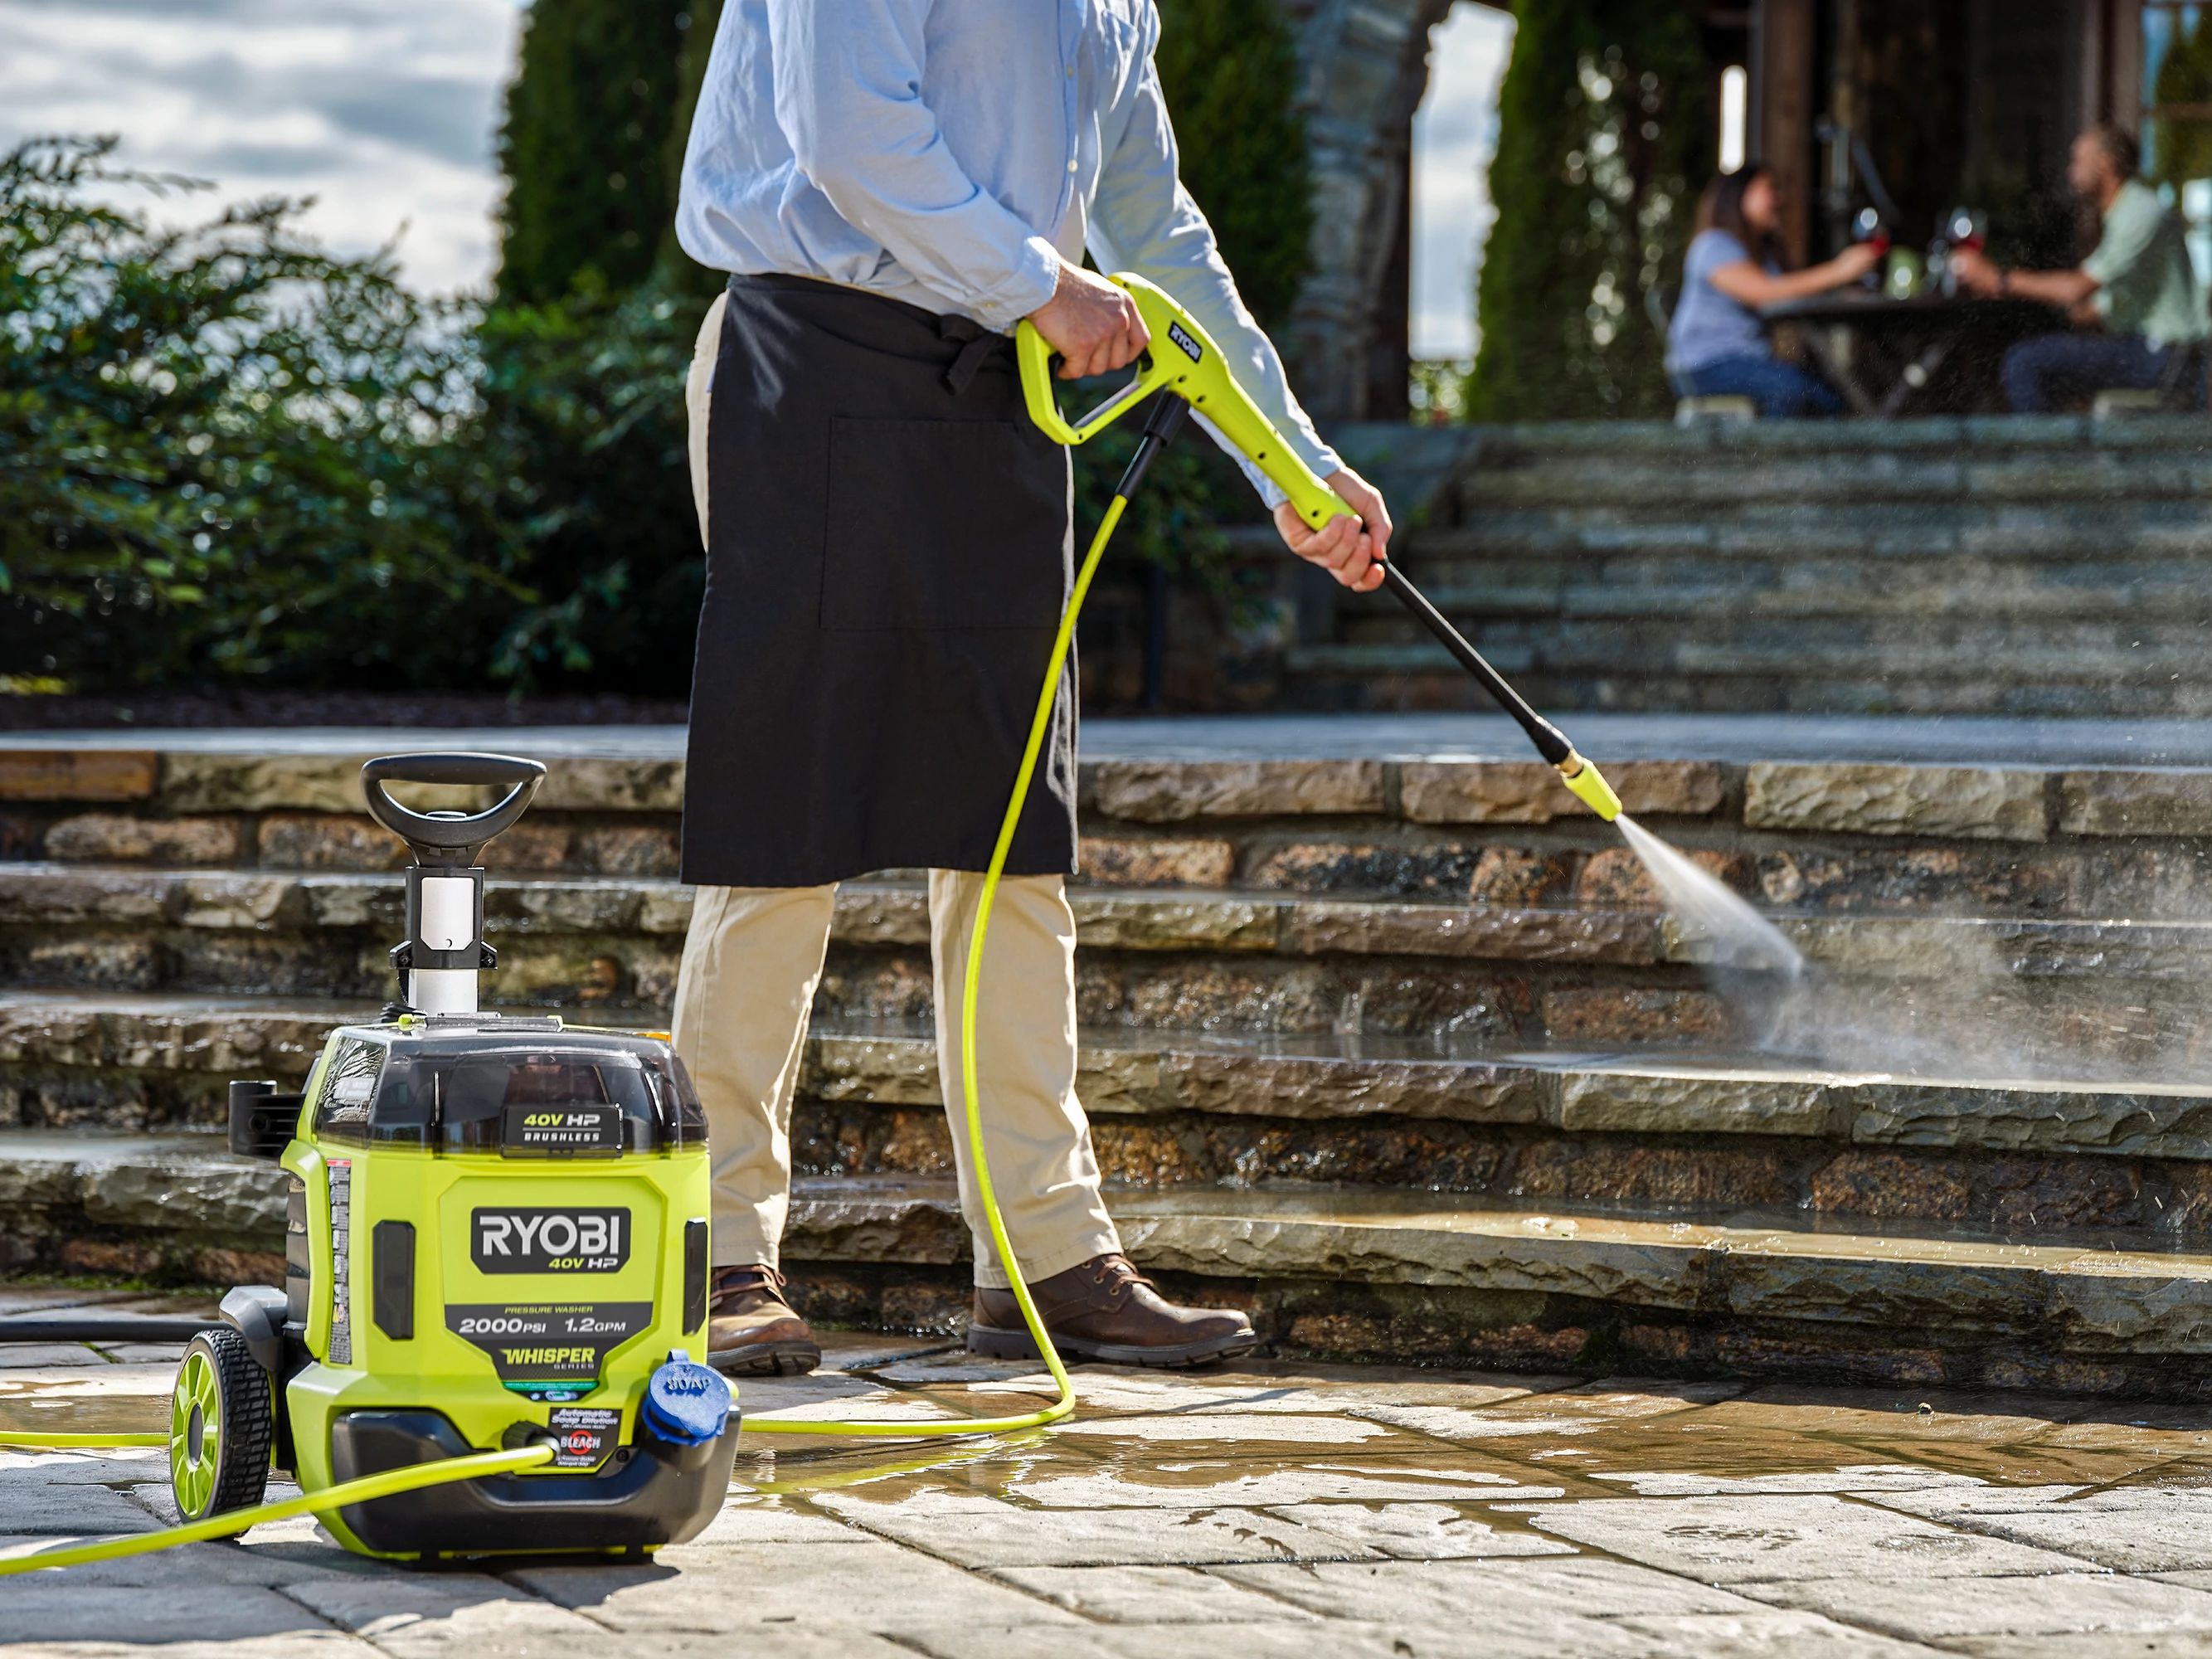 •	This Whisper Series pressure washer is engineered to be 81% quieter than gas pressure washers, allowing you to clean anytime of day without disturbing others